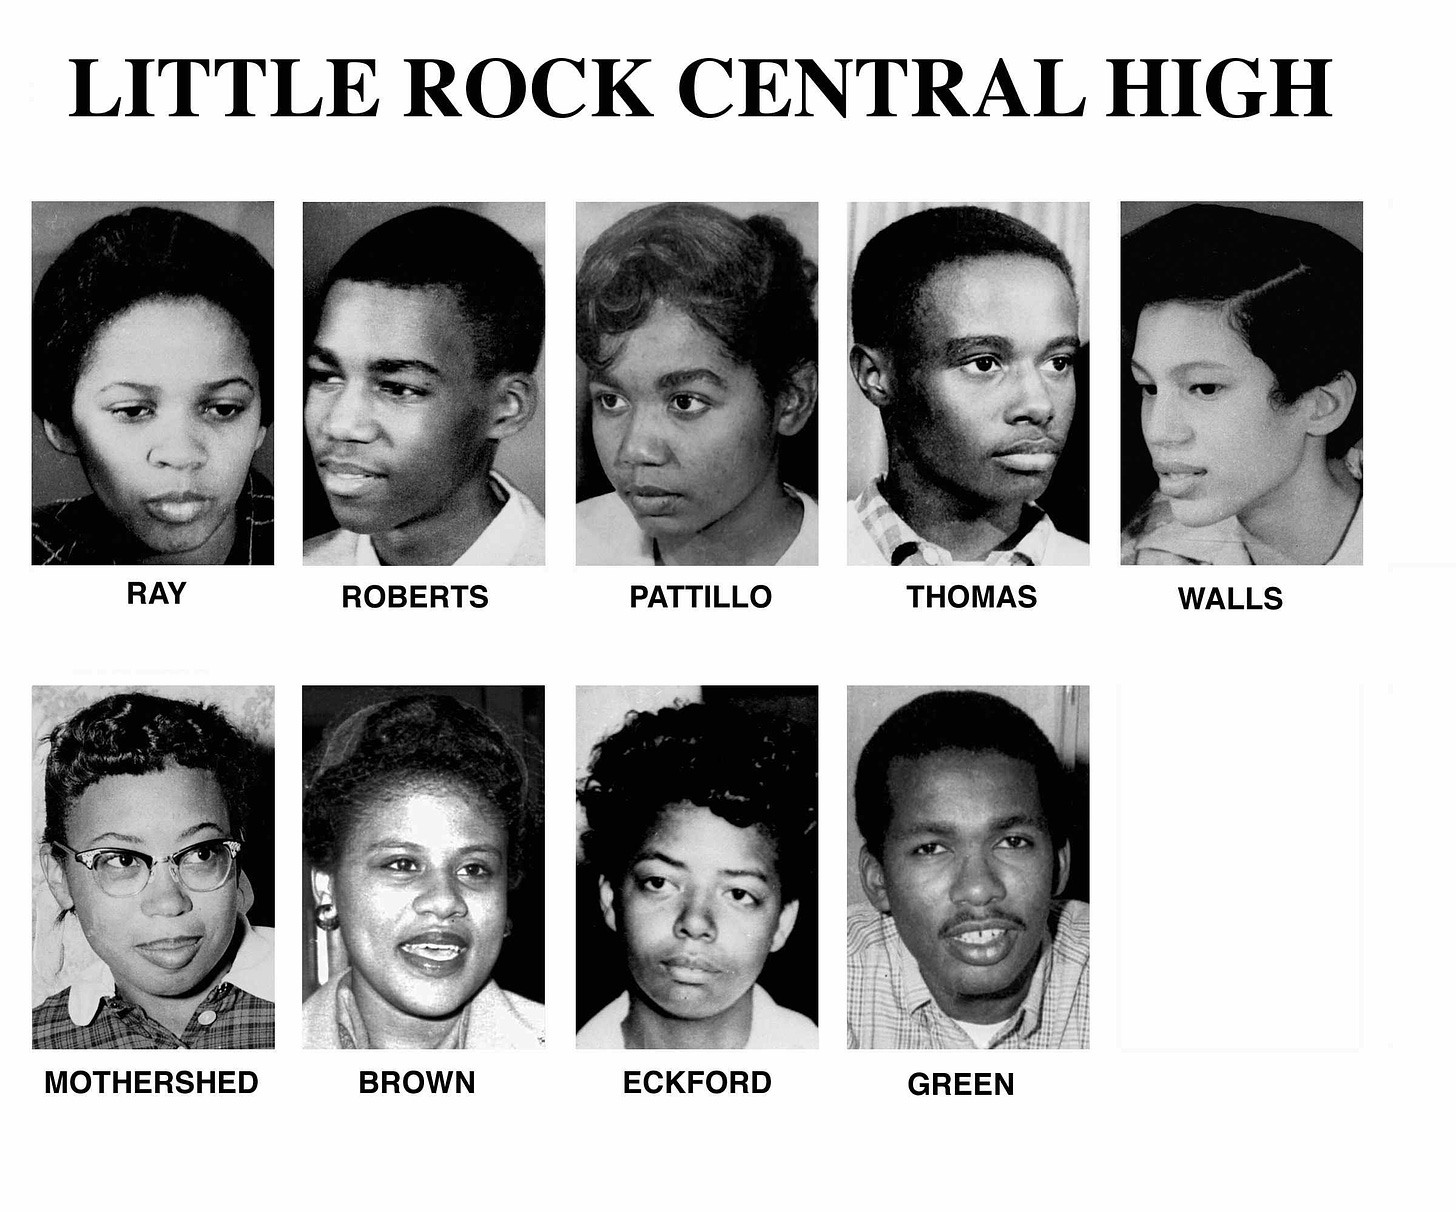 A wild day of hate and violence': The day the Little Rock Nine desegregated  a school - pennlive.com